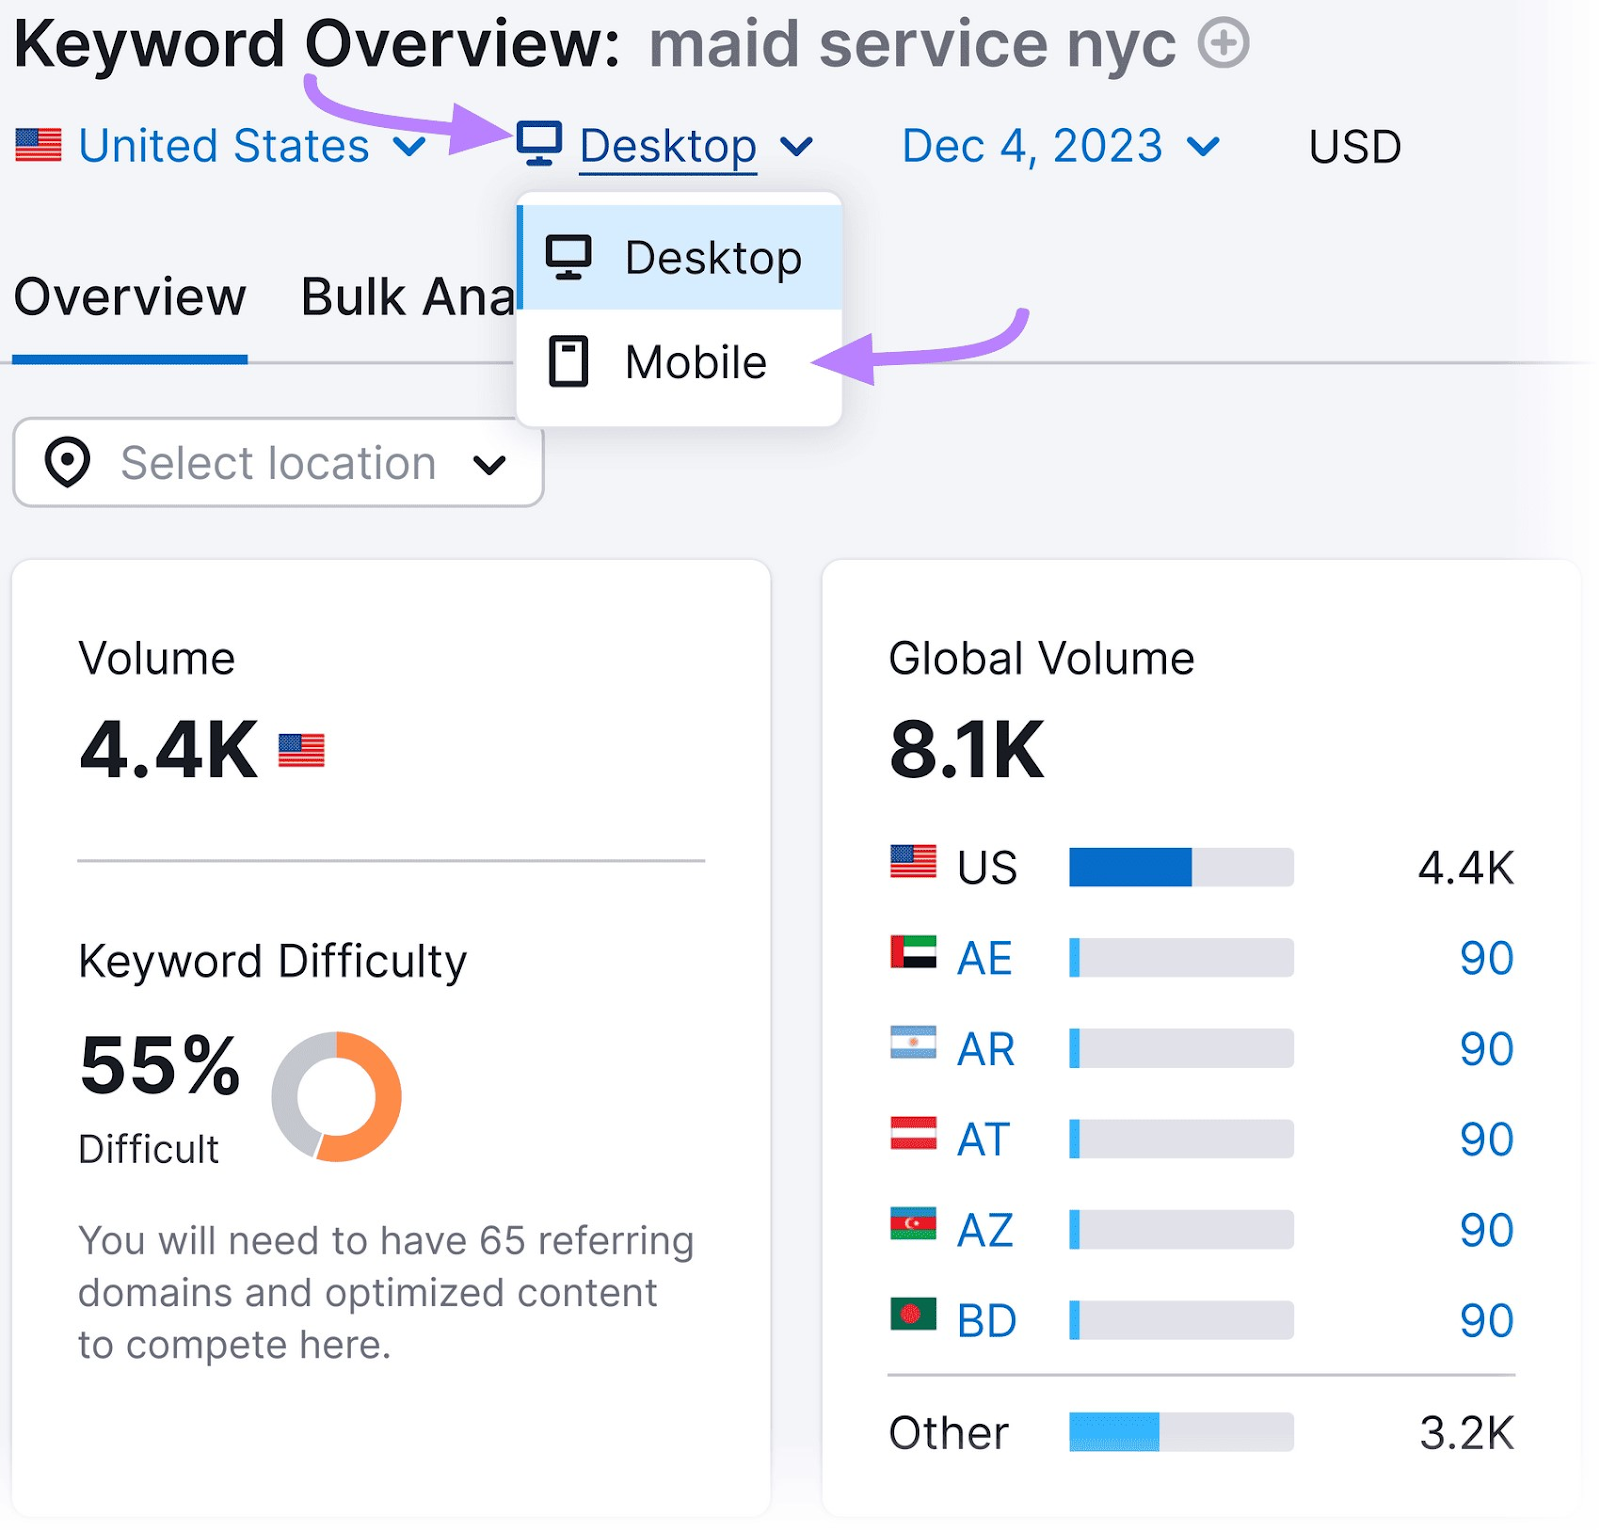 Switching results to "Mobile" in Keyword Overview tool